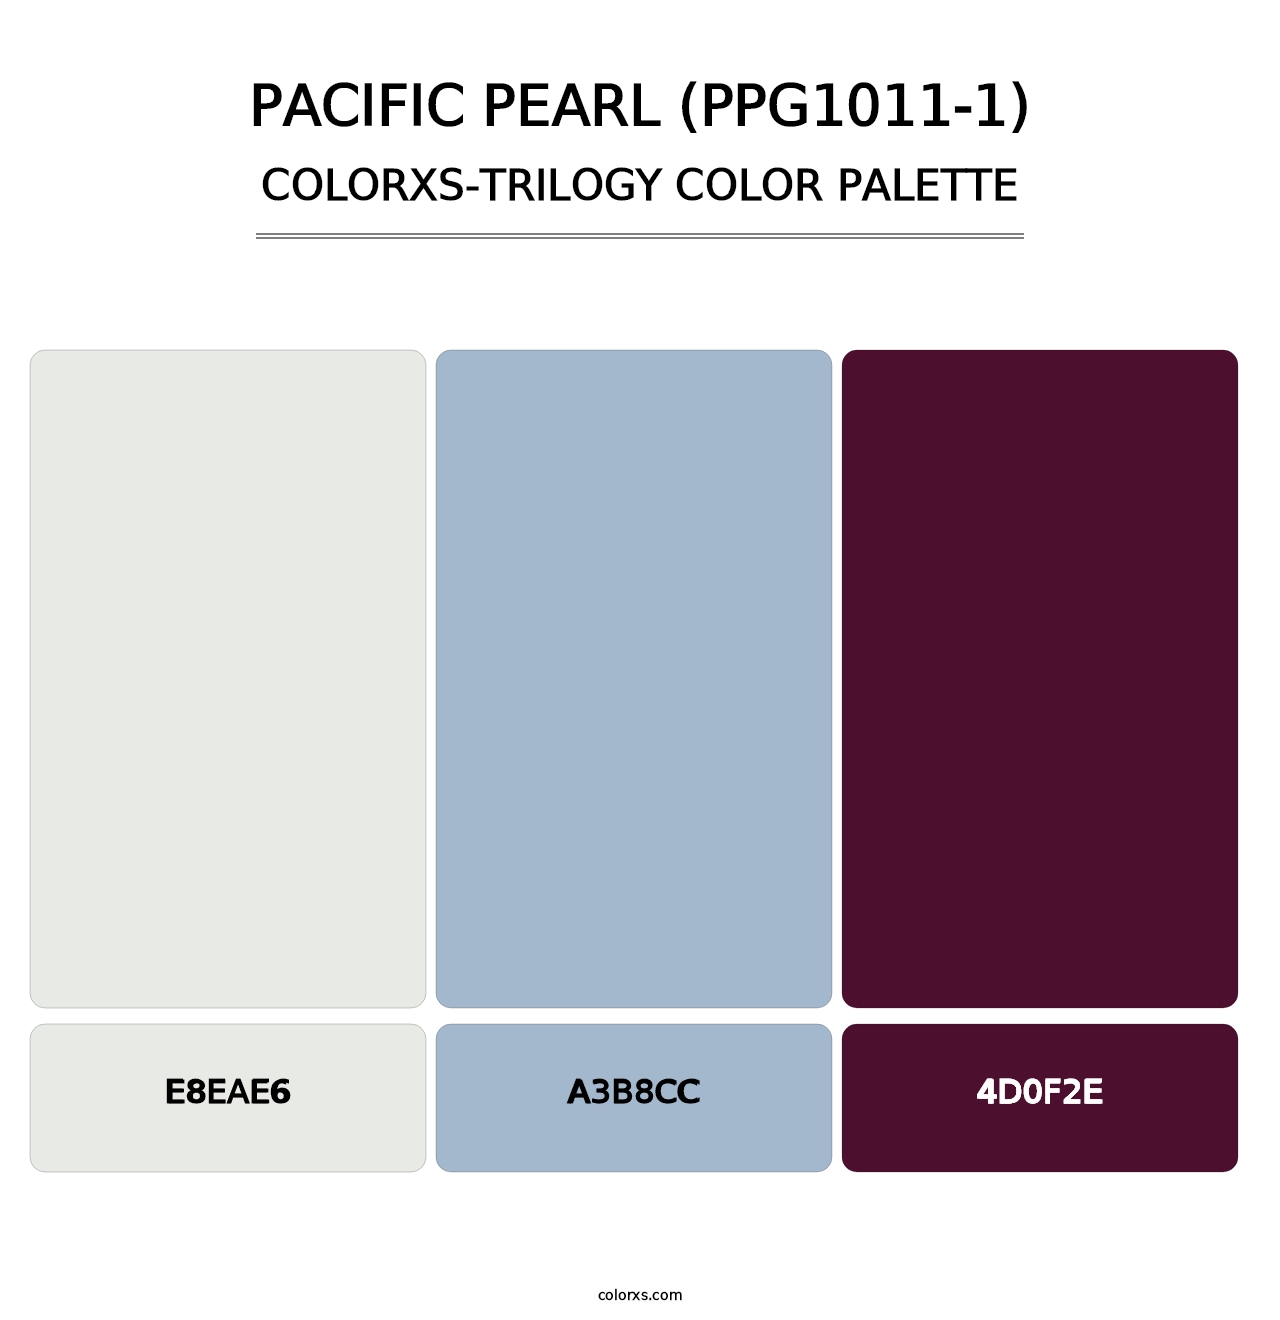 Pacific Pearl (PPG1011-1) - Colorxs Trilogy Palette